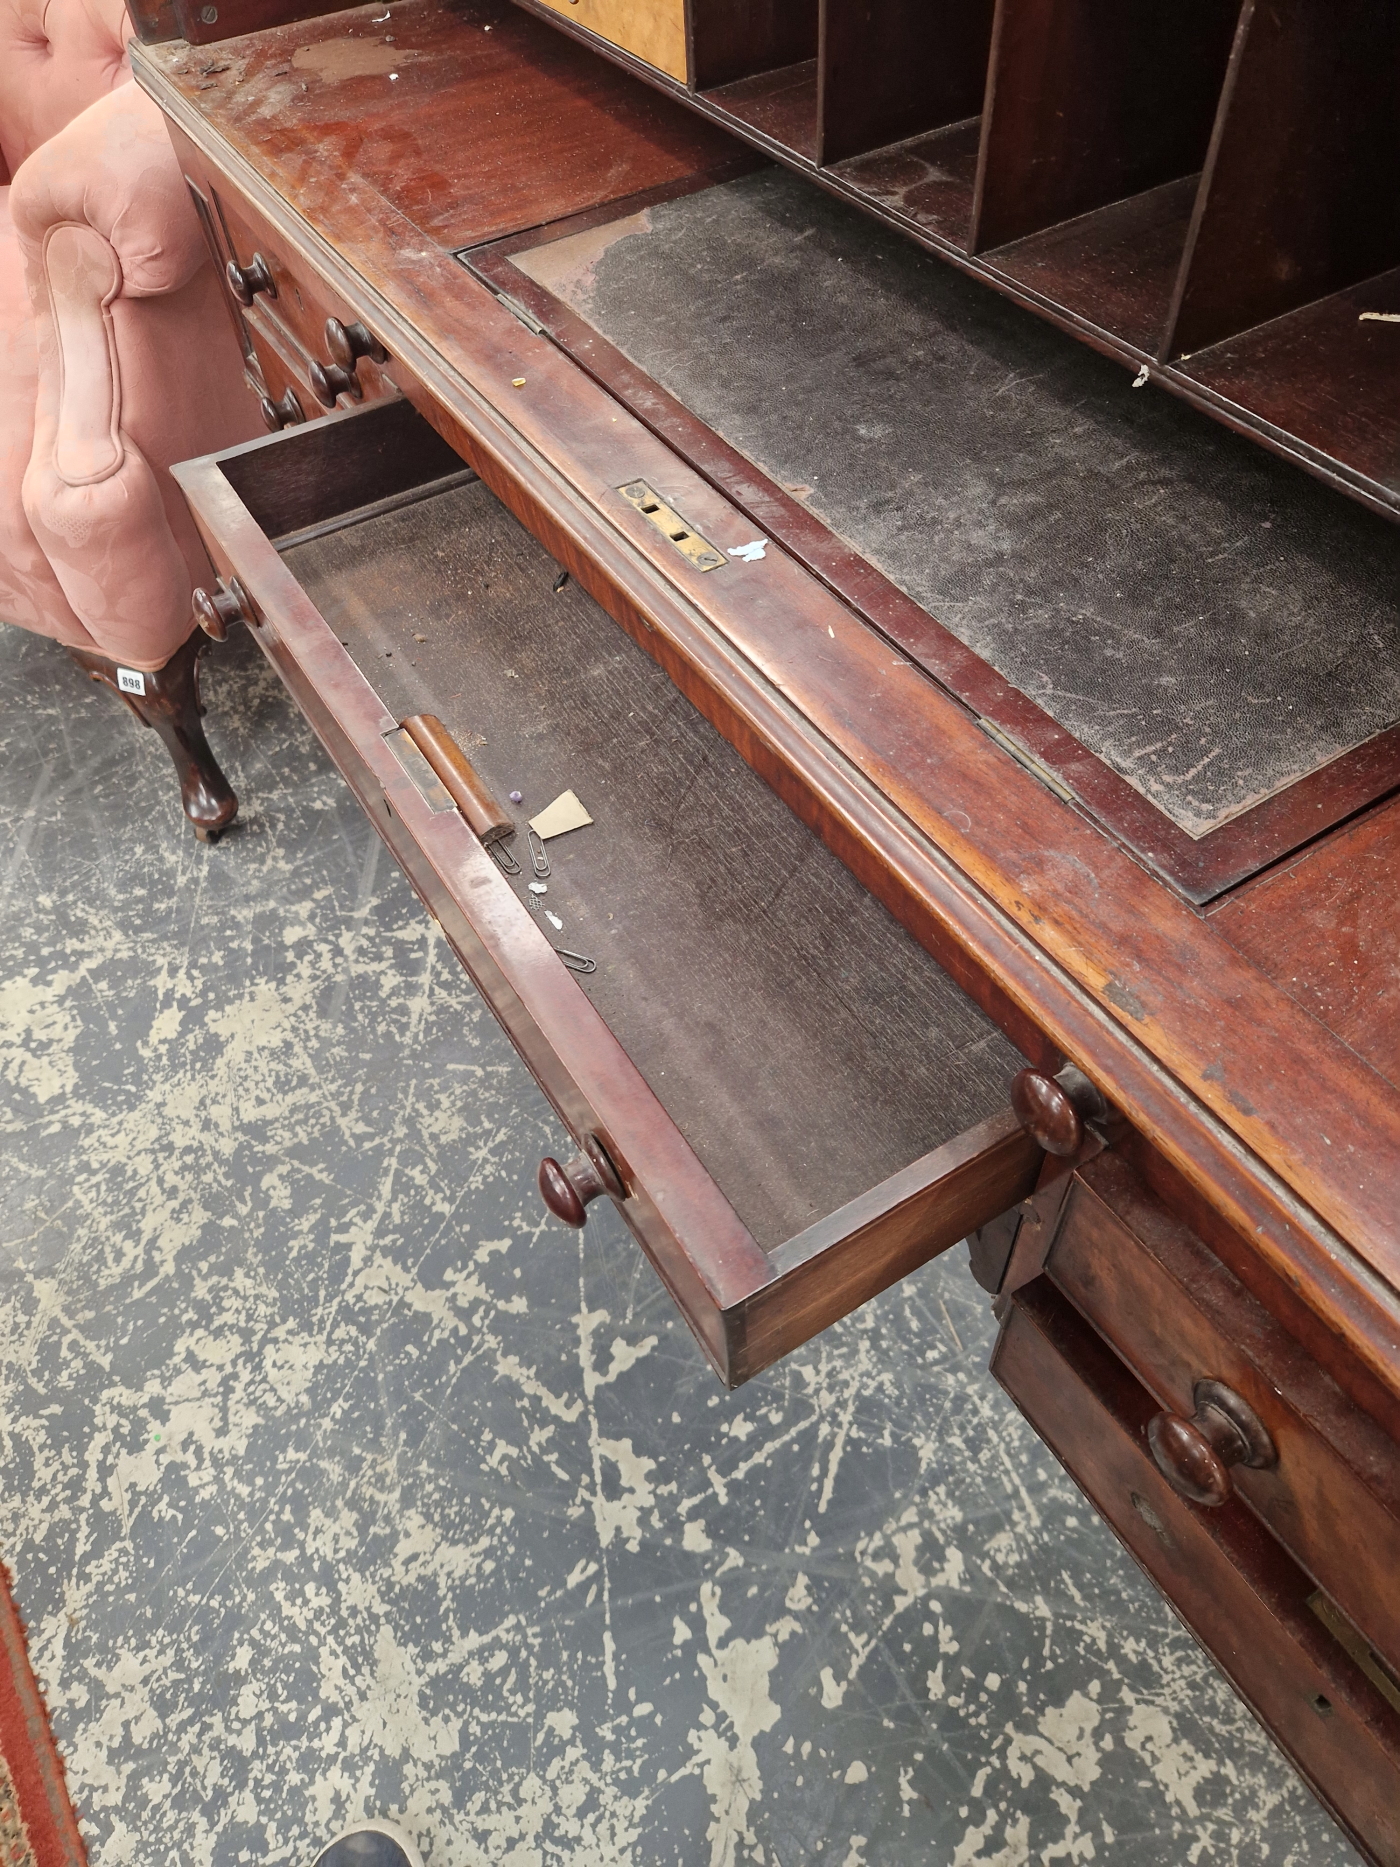 A 19th C. MAHOGANY ROLL TOP DESK WITH A CONFIGURATION OF FIVE DRAWERS ABOVE THE CYLINDRICAL LEGS - Image 8 of 9